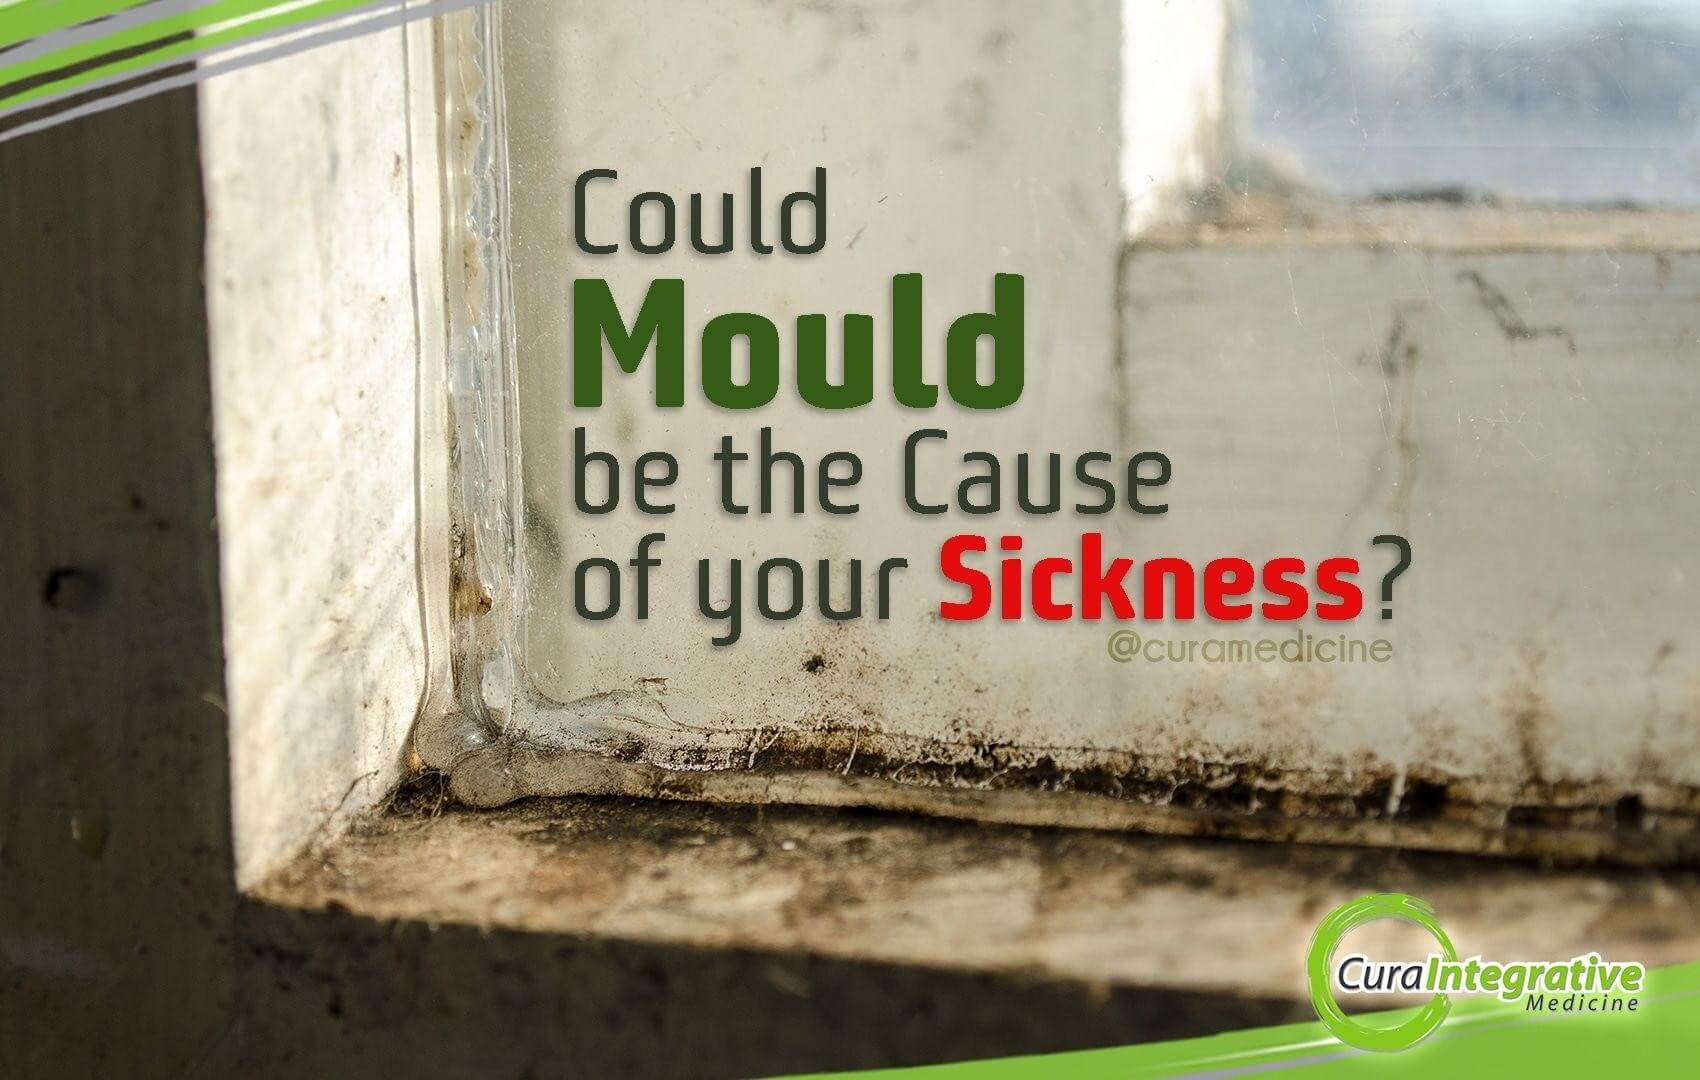 Could Mould be the Cause of Your Sickness?